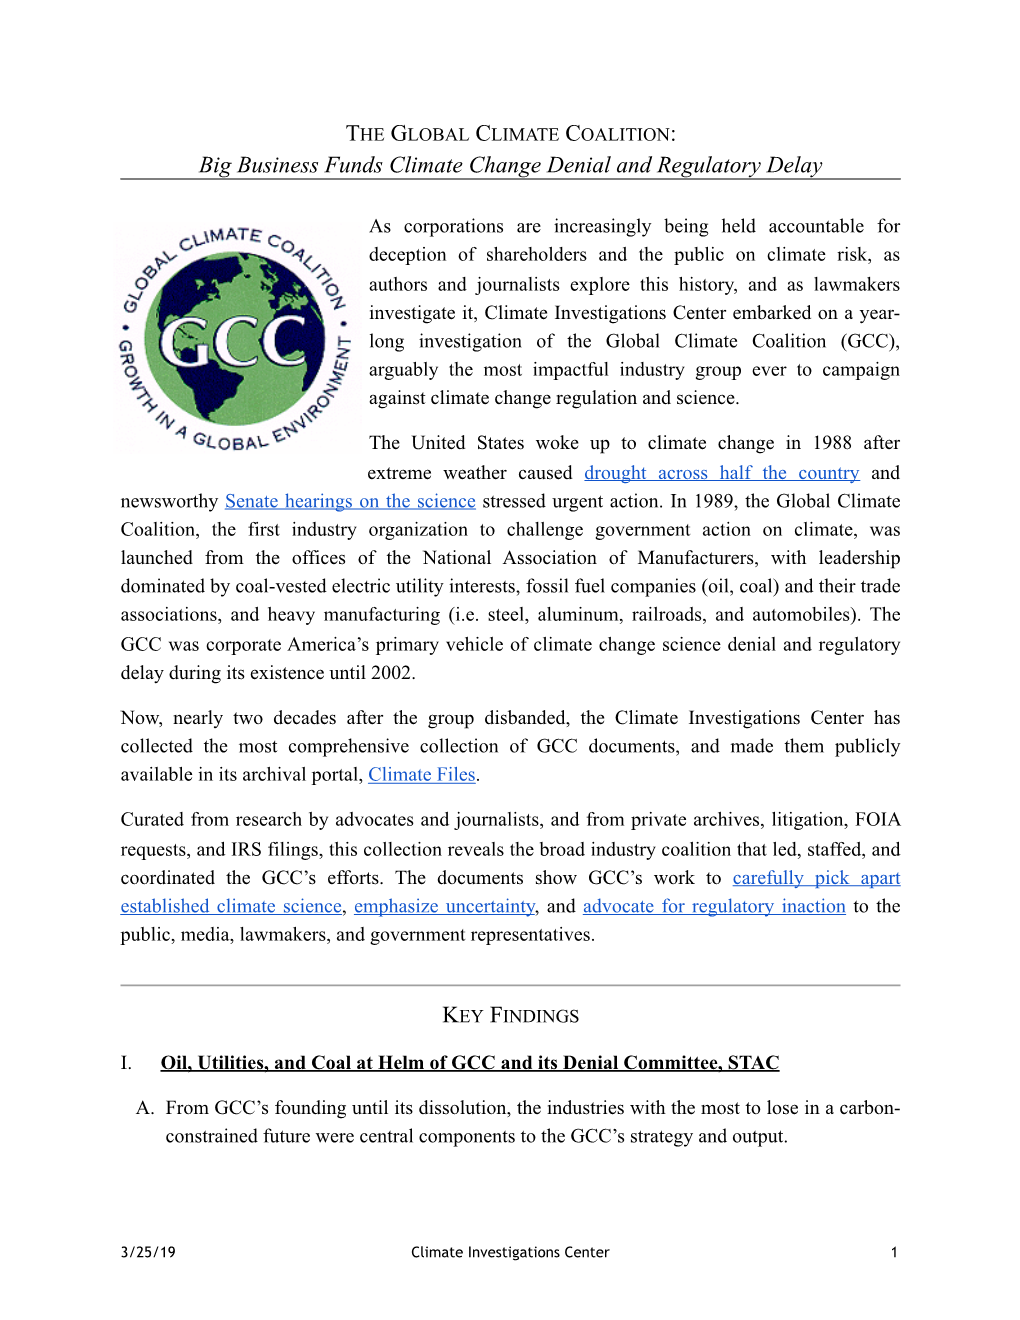 GLOBAL CLIMATE COALITION: Big Business Funds Climate Change Denial and Regulatory Delay